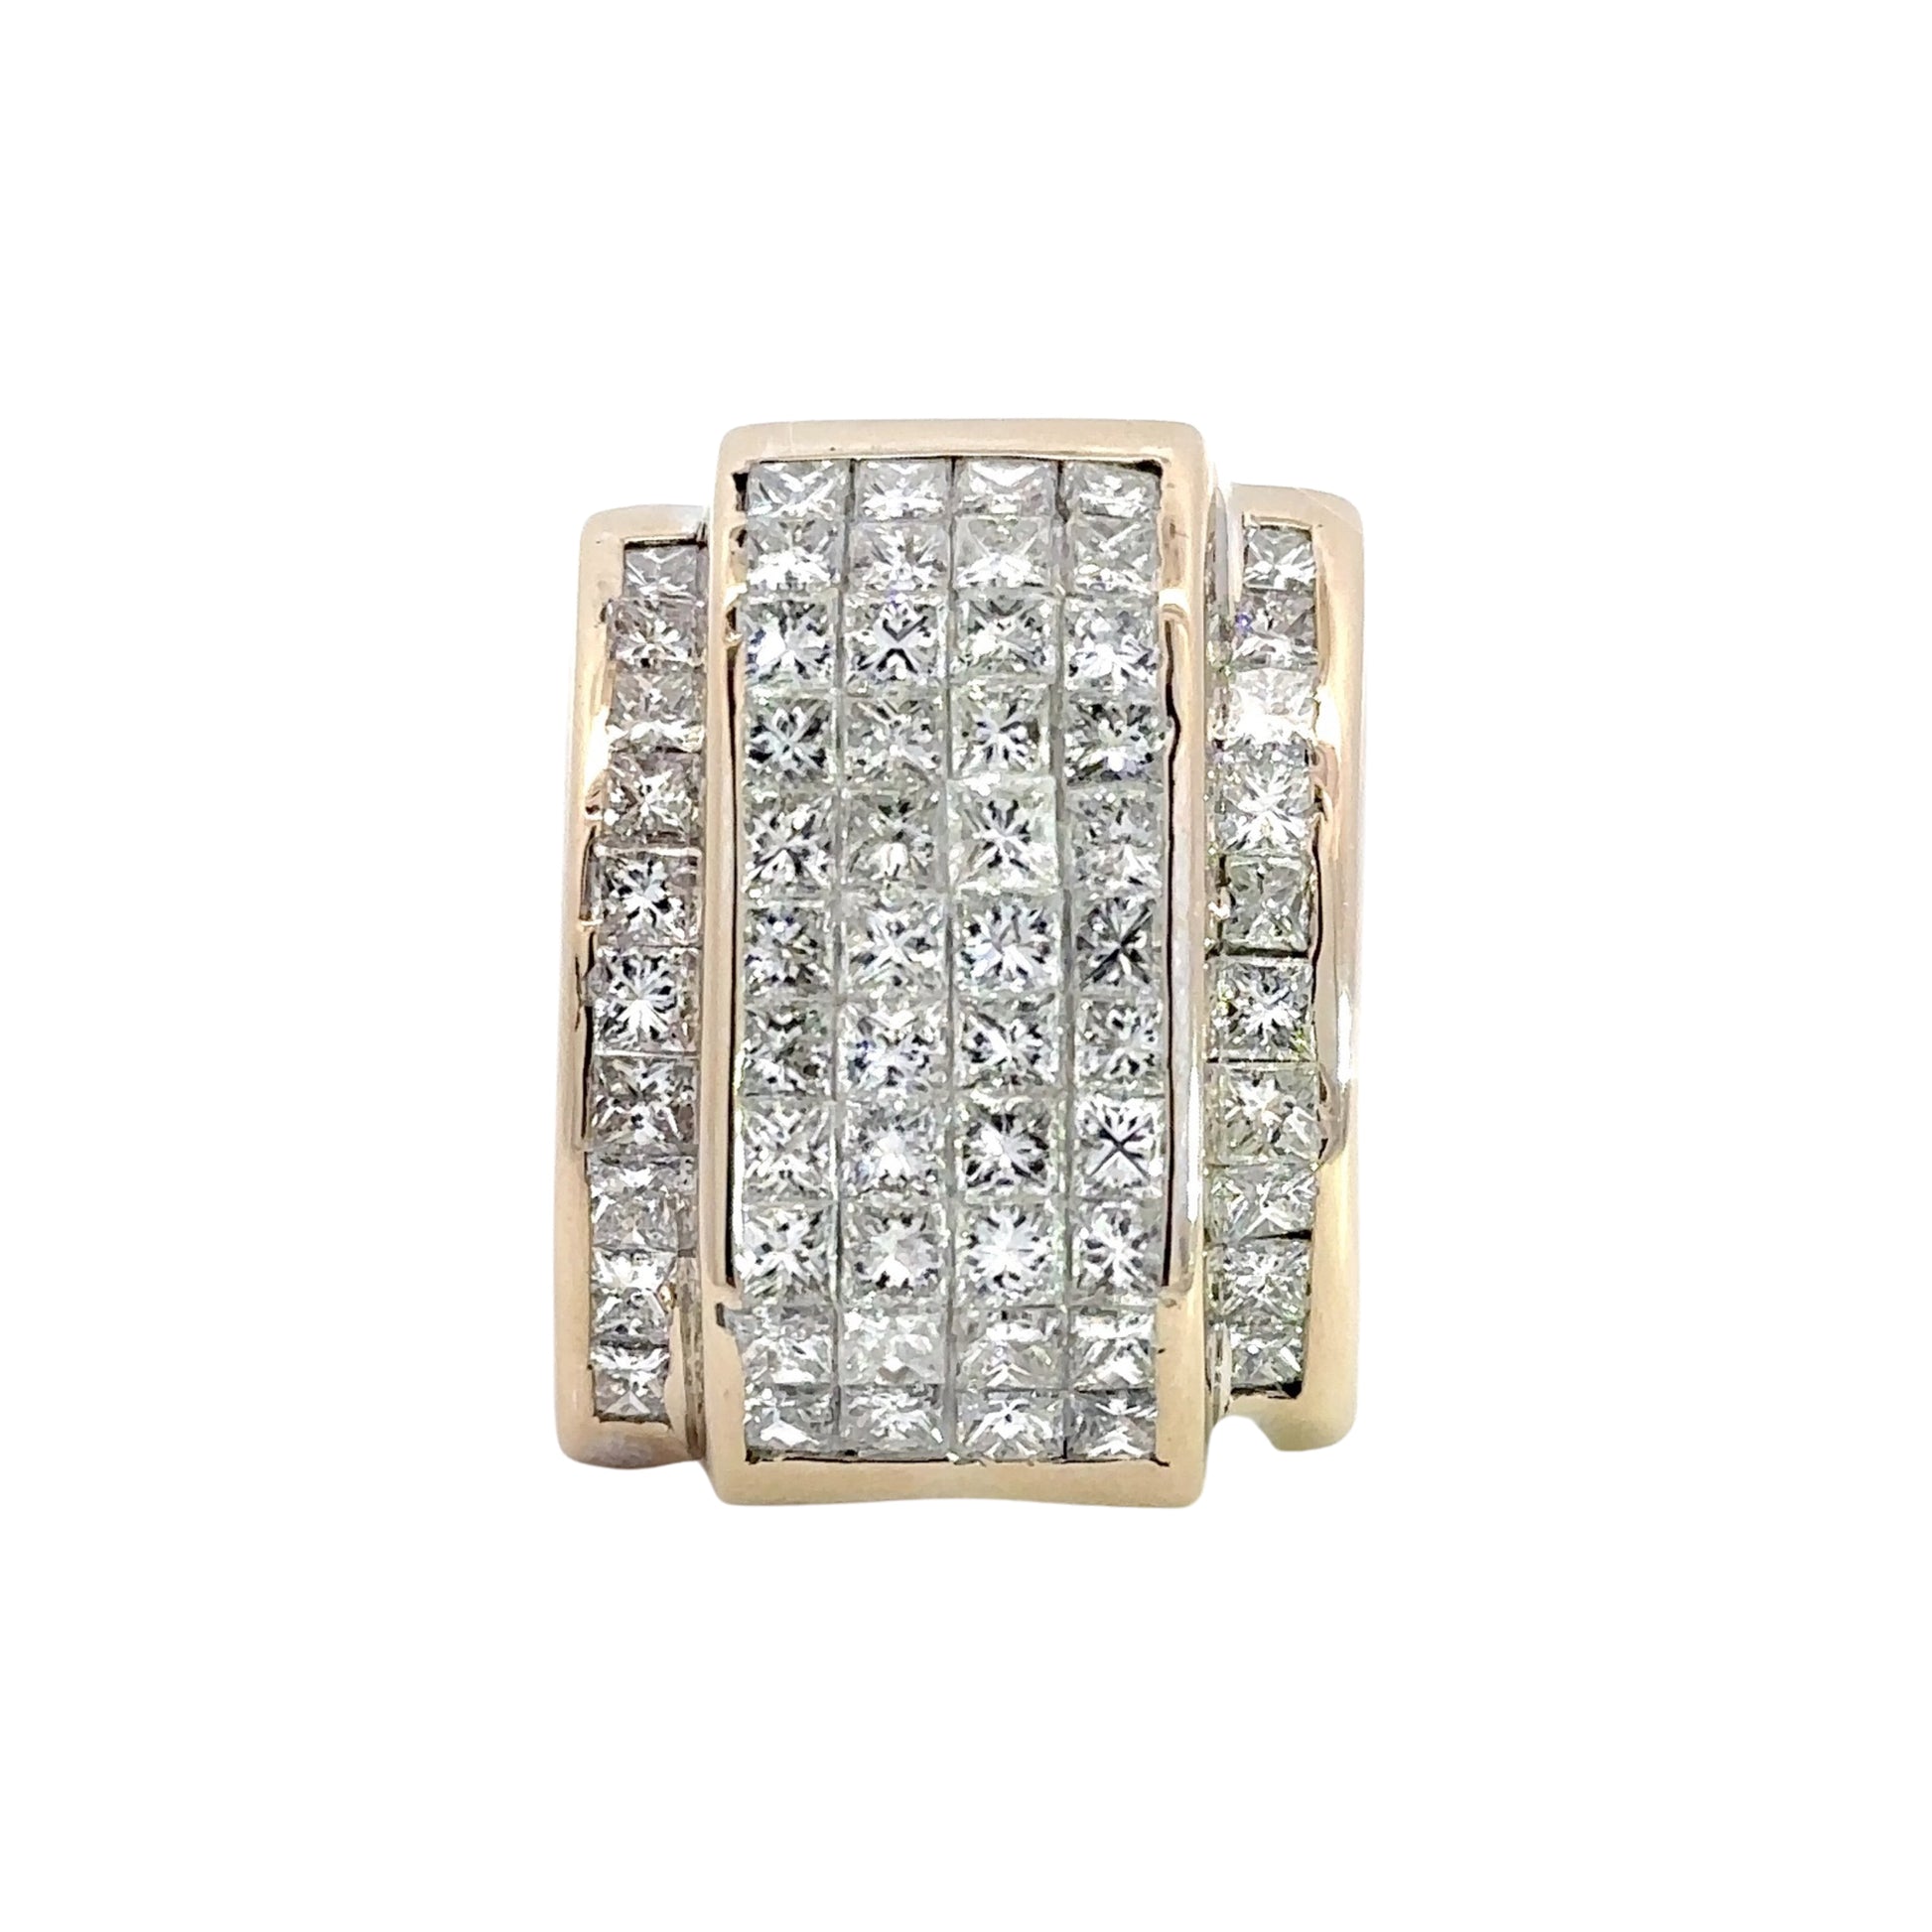 Men's Rectangle-shaped ring with 1 big rectangle column in the center with 4 rows of 11 princess-cut diamonds + 1 side row on each side with 10 princess-cut diamonds each